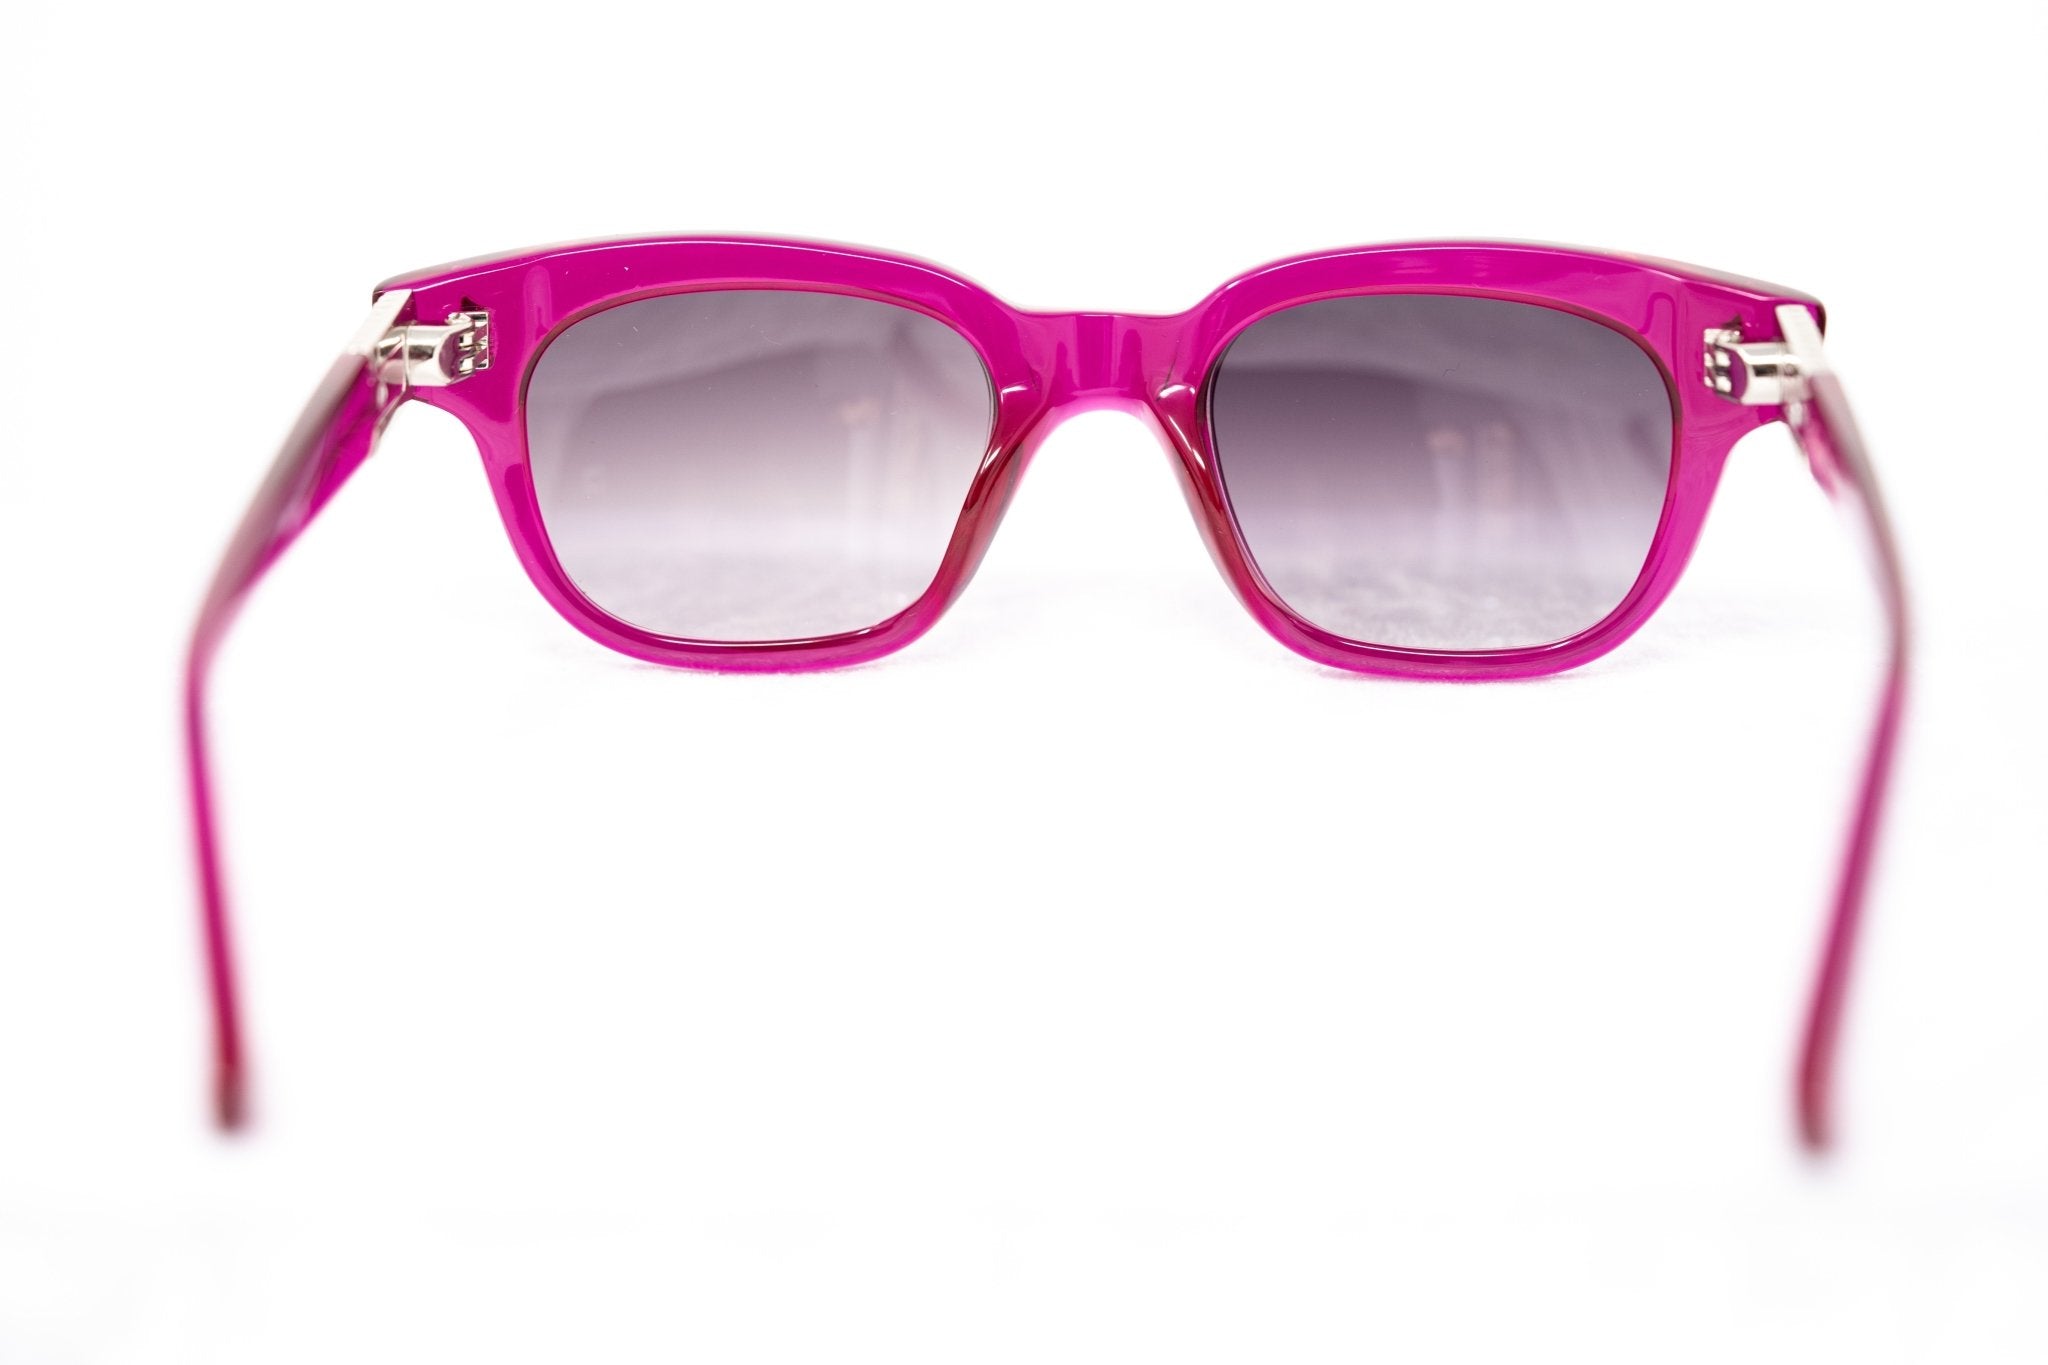 Agent Provocateur Sunglasses Square Pink and Grey Lenses - AP24C5SUN - Watches & Crystals